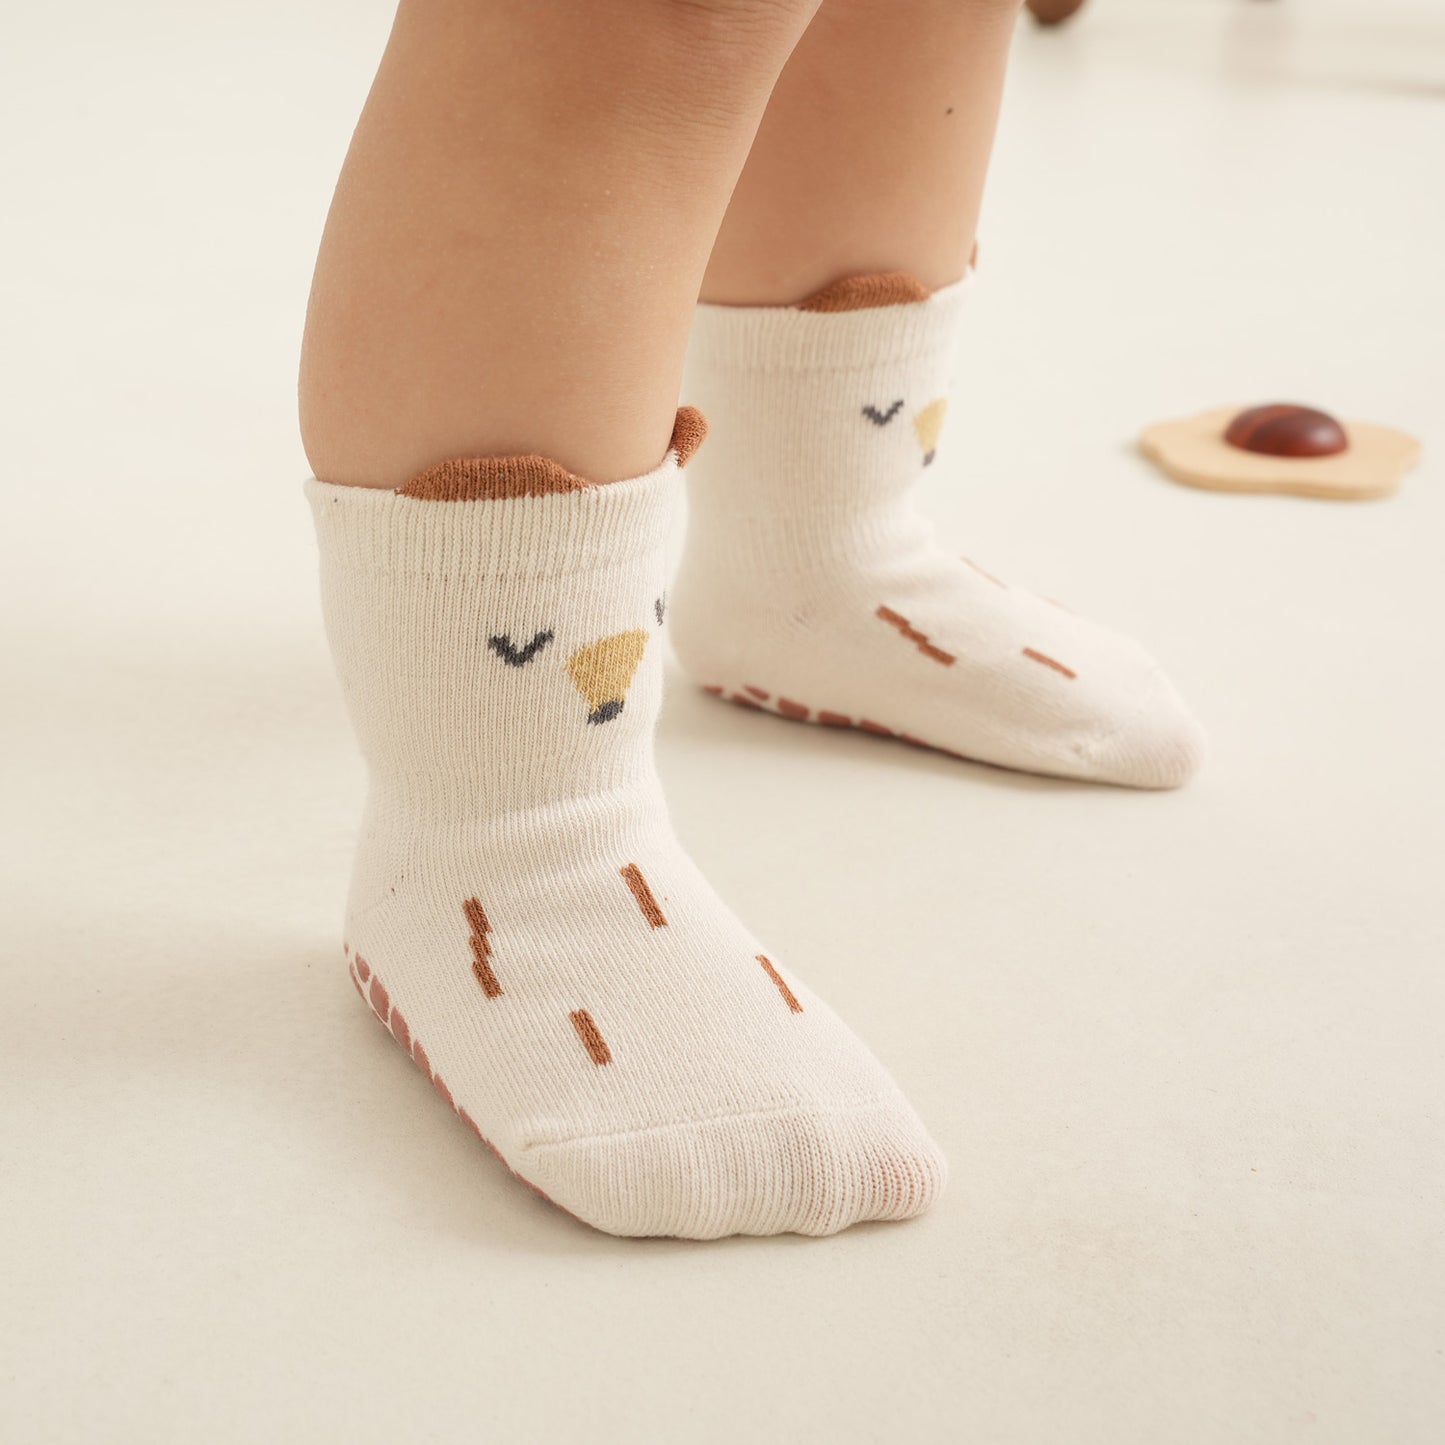 Fox life - 4 Pairs of Stay-On Baby & Toddler Non-Slip Socks